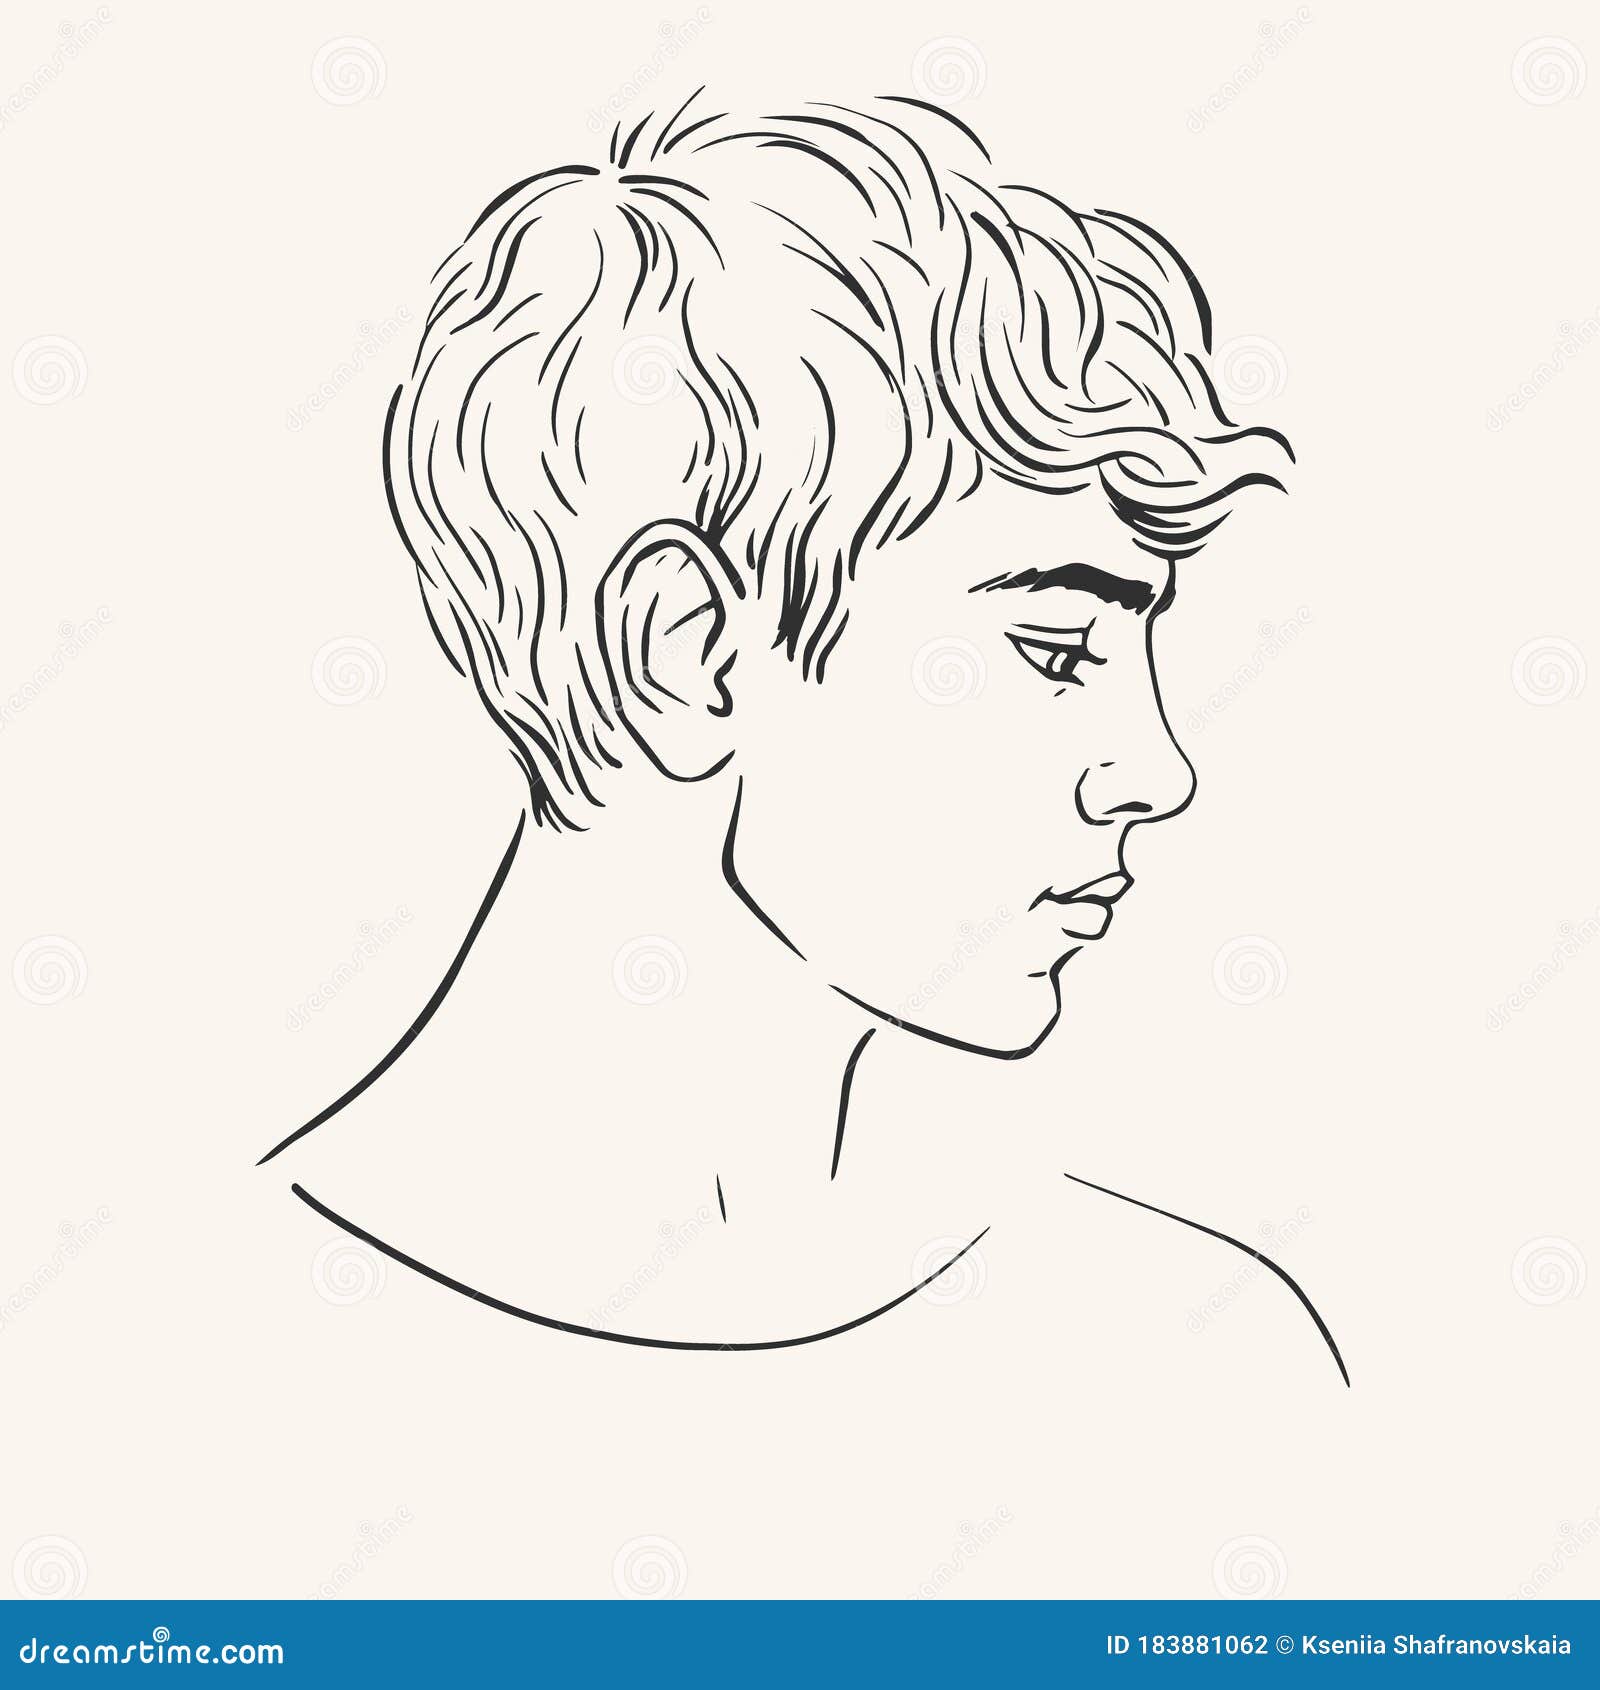 Profile of Young Man with Short Curly Hair, Hand Drawn Vector Illustration  Stock Vector - Illustration of glamour, healthy: 183881062